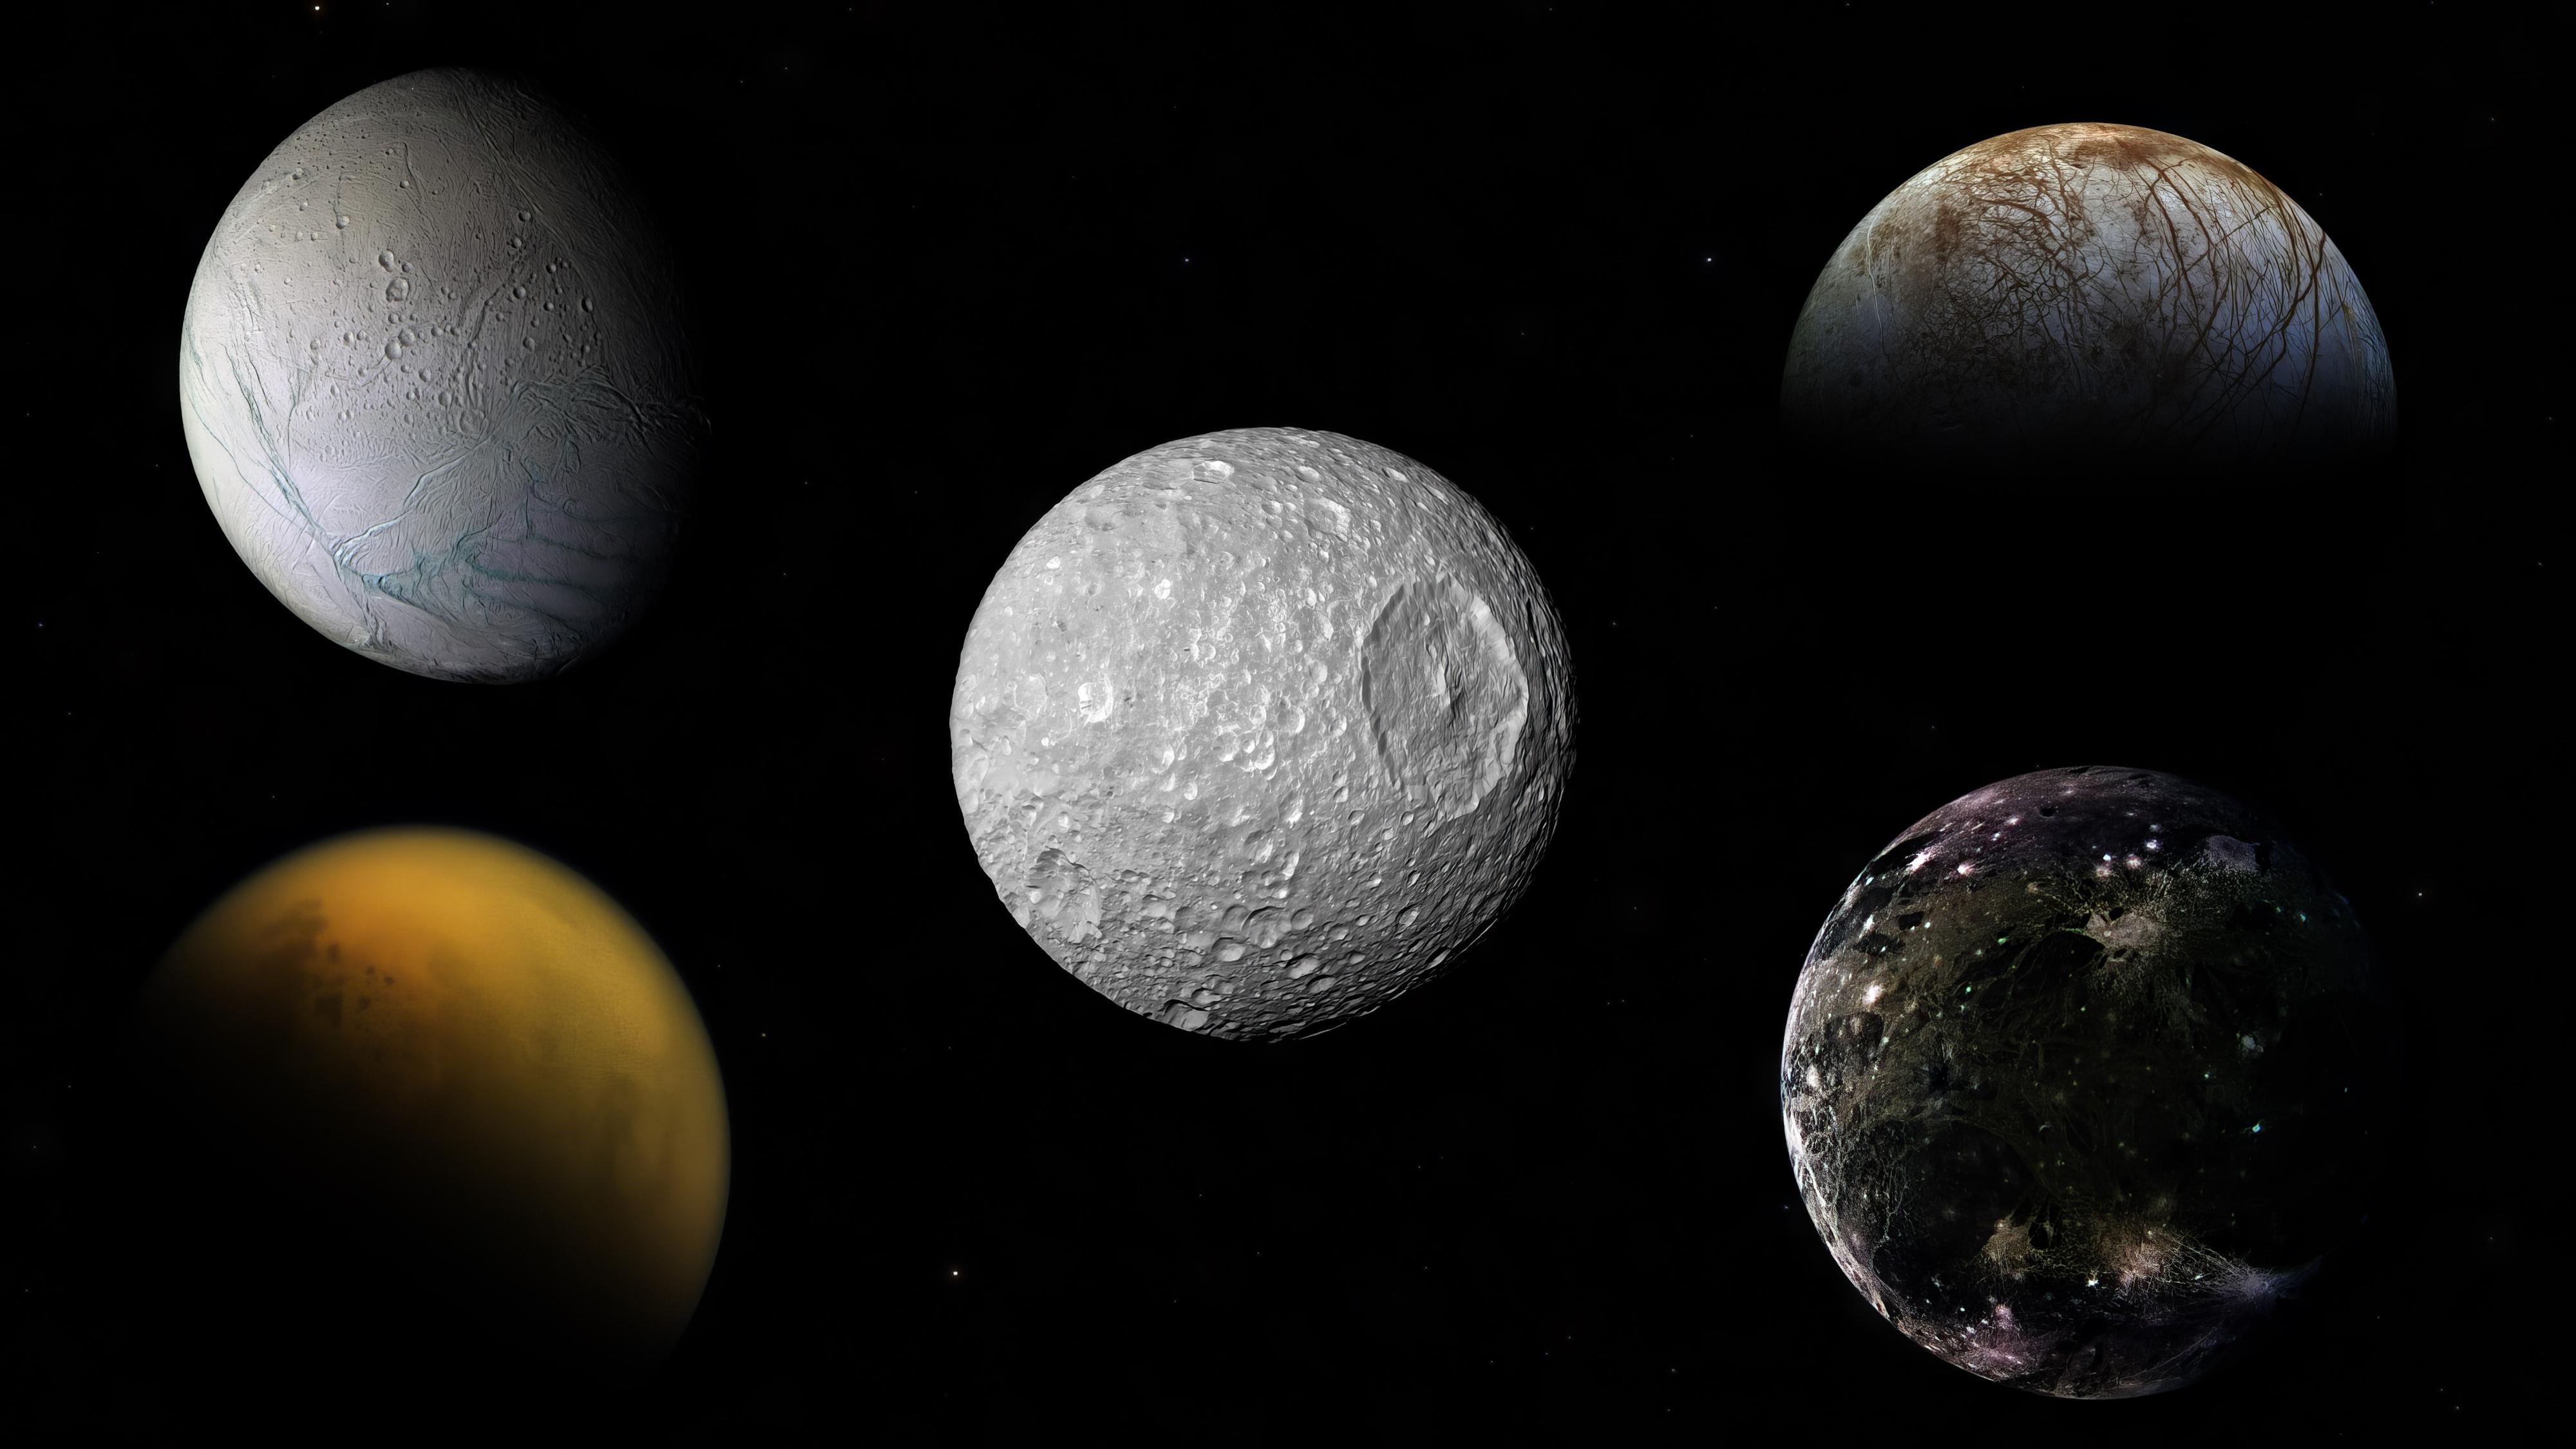 Mimas joins family of moons believed to have an ocean beneath their surfaces: Jupiter’s Europa and Ganymede, and Saturn’s Titan and Enceledaus